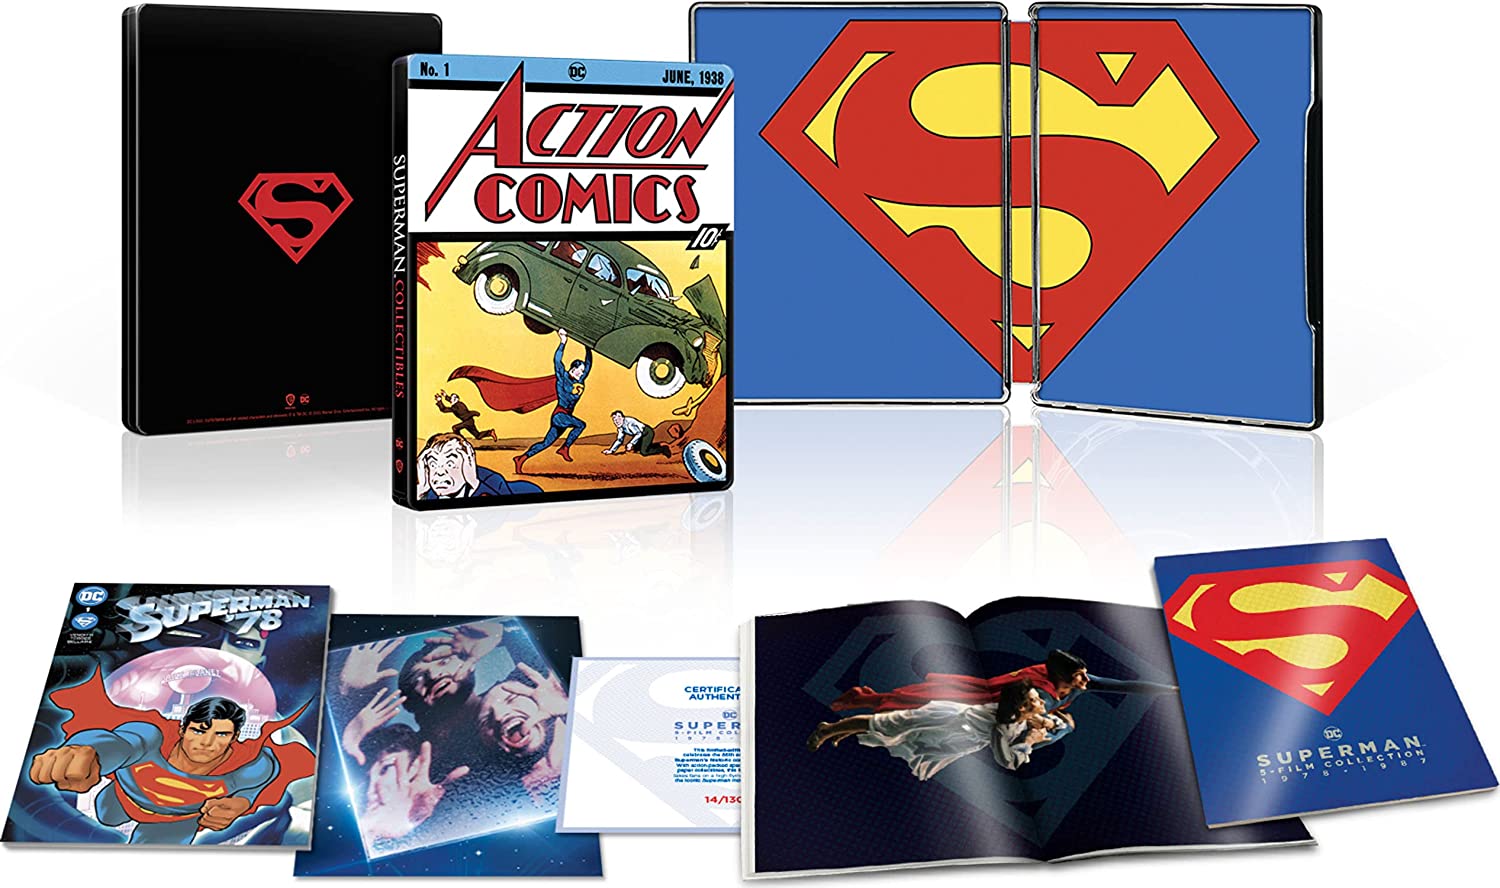 Superman 5 Film Collection 4k Blu-ray open